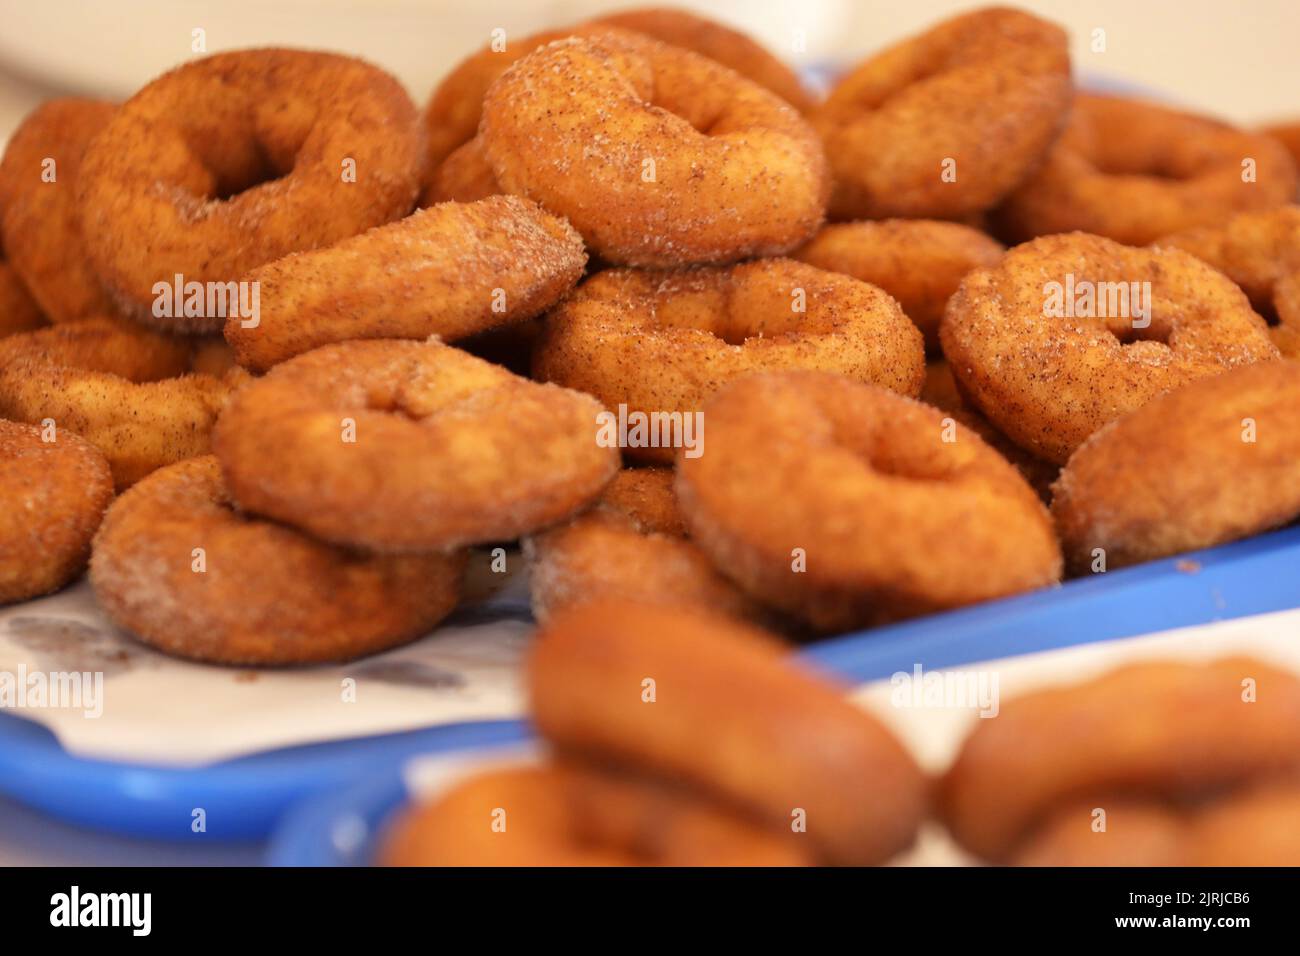 A number of plain fresh golden fried cinnamon sugar doughnuts or donuts stacked on a blue tray and baking paper Stock Photo